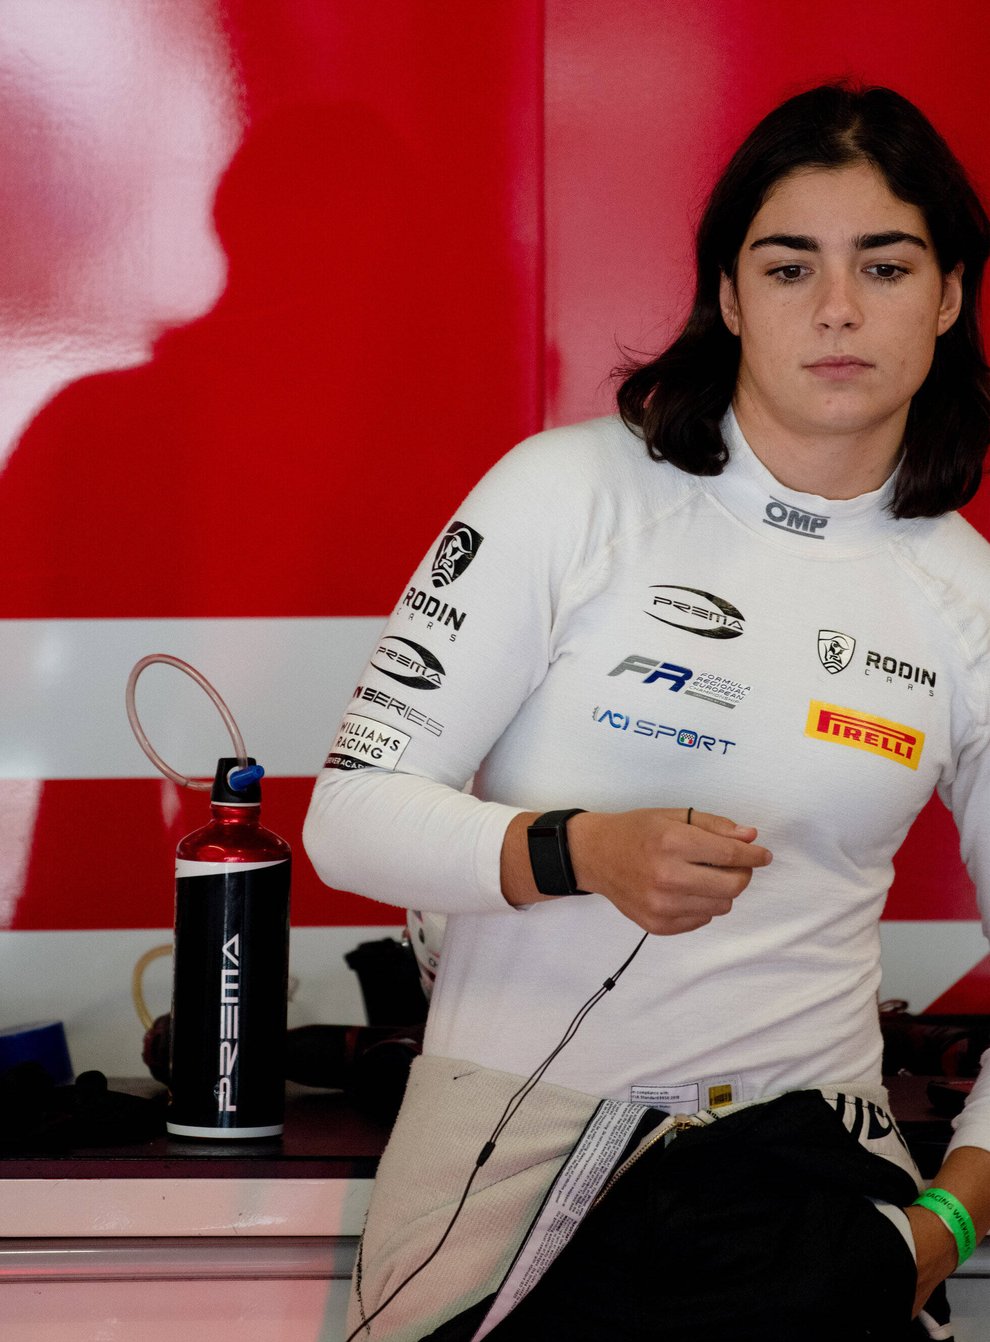 <p>Jamie Chadwick will race for Veloce in Extreme E</p>